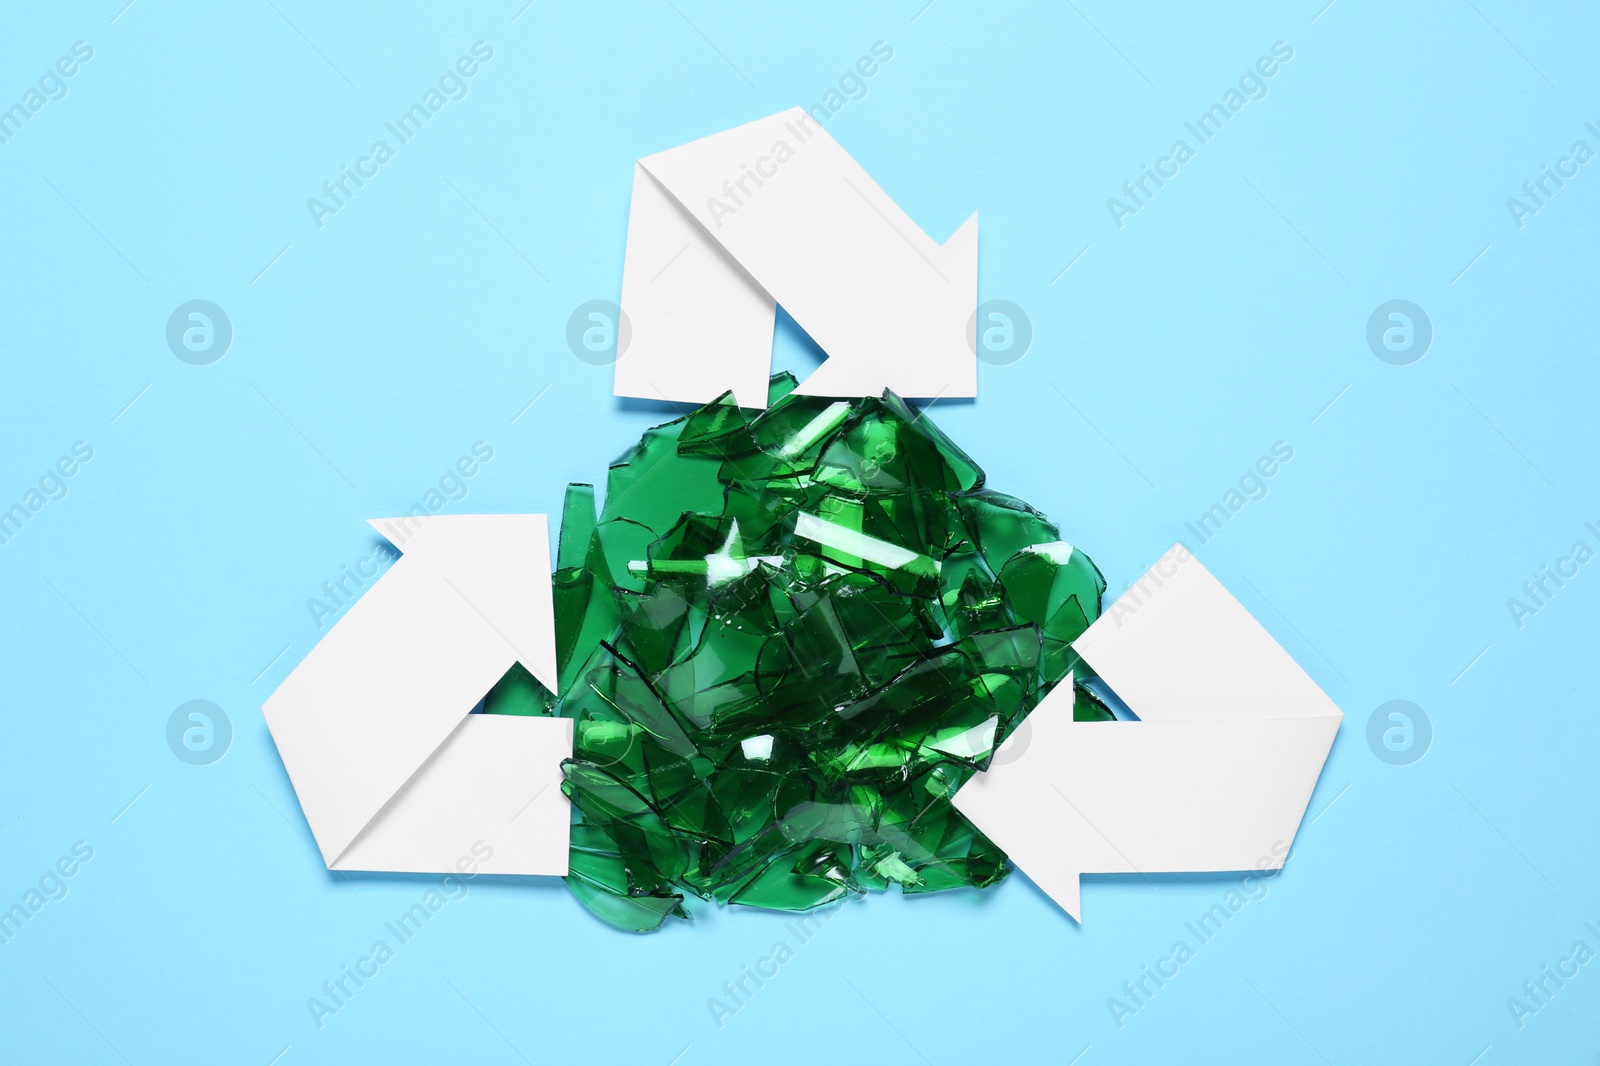 Photo of Recycling symbol and glass pieces on light blue background, flat lay